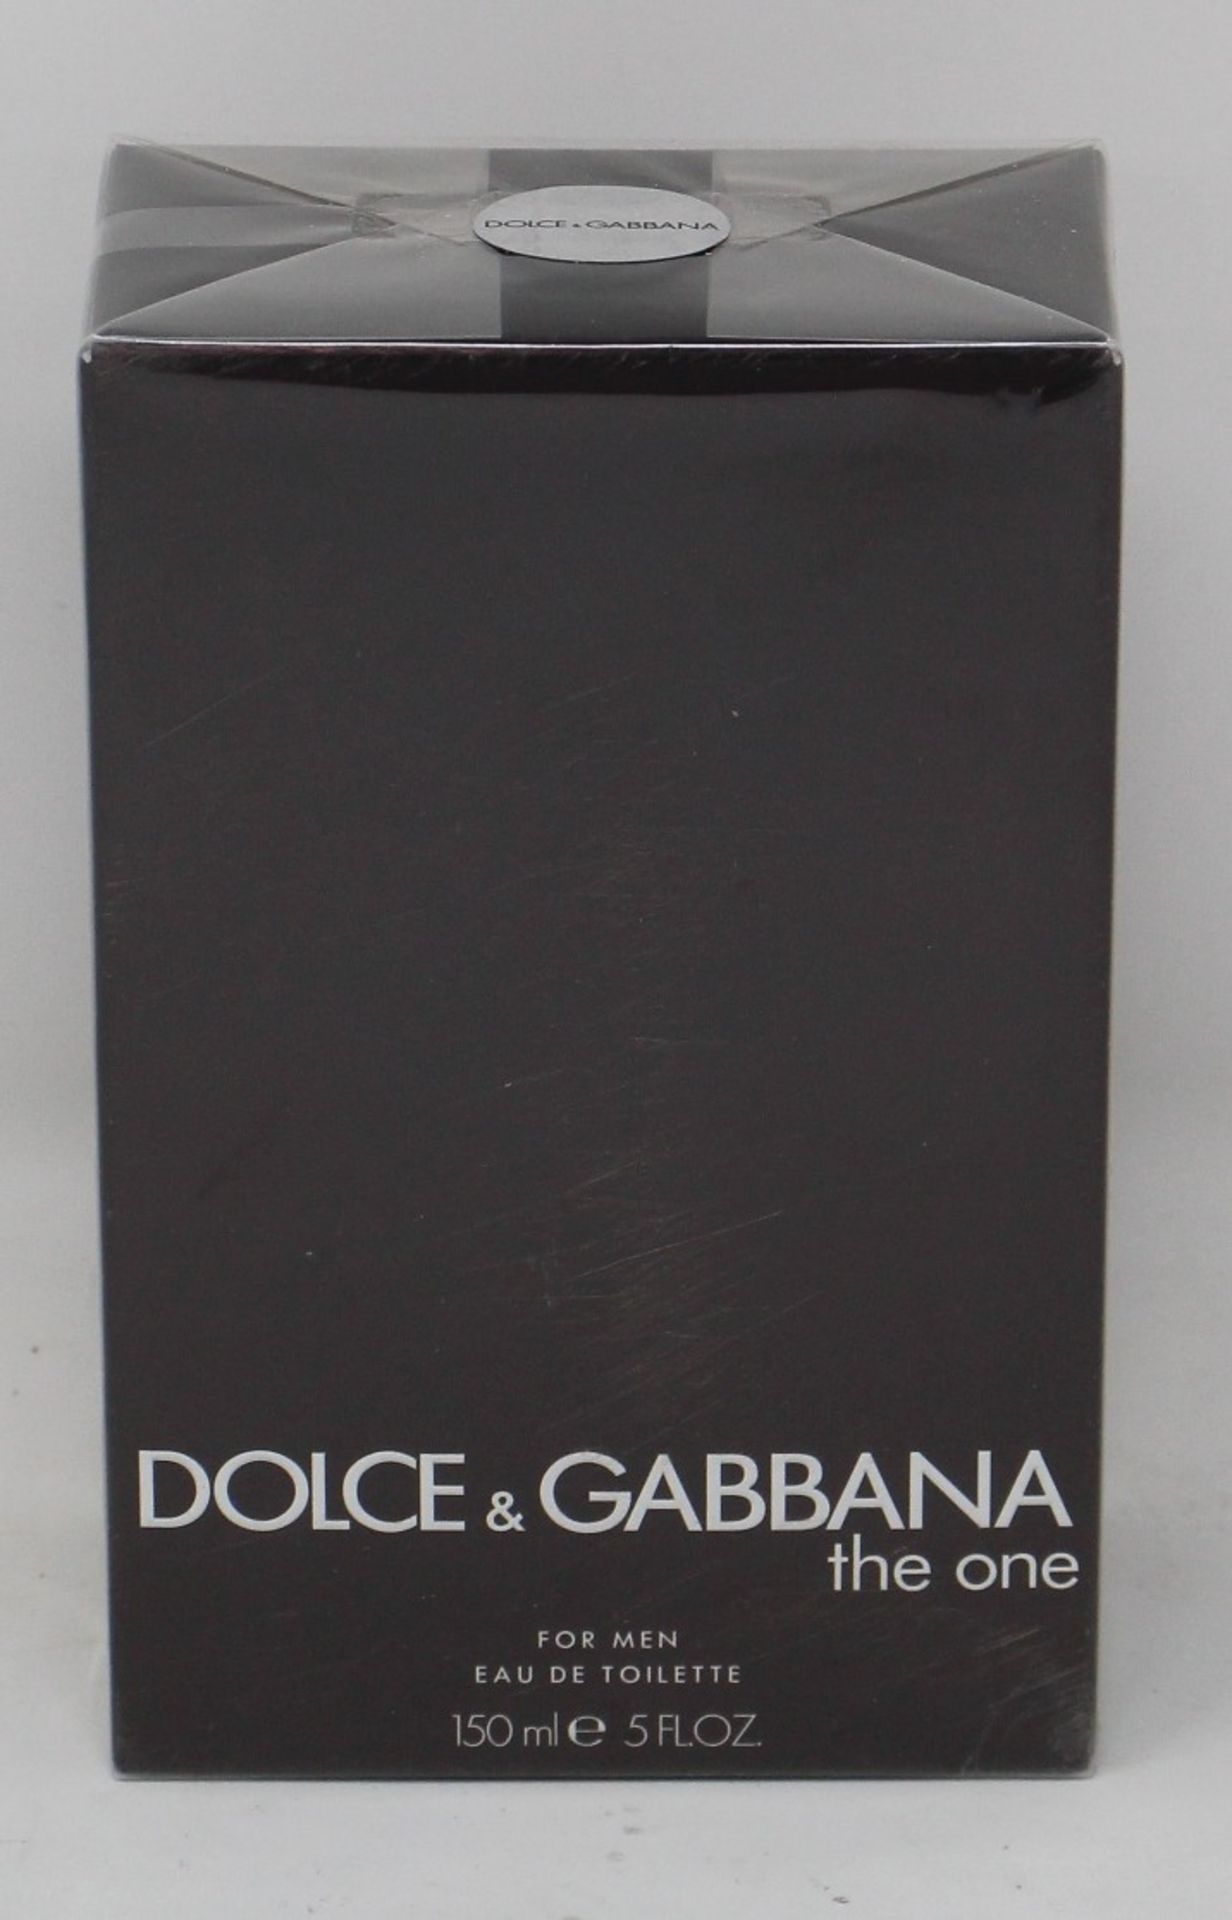 Four as new Dolce & Gabbana The One for men eau de toilette (4 x 150ml some scuff marks to outer